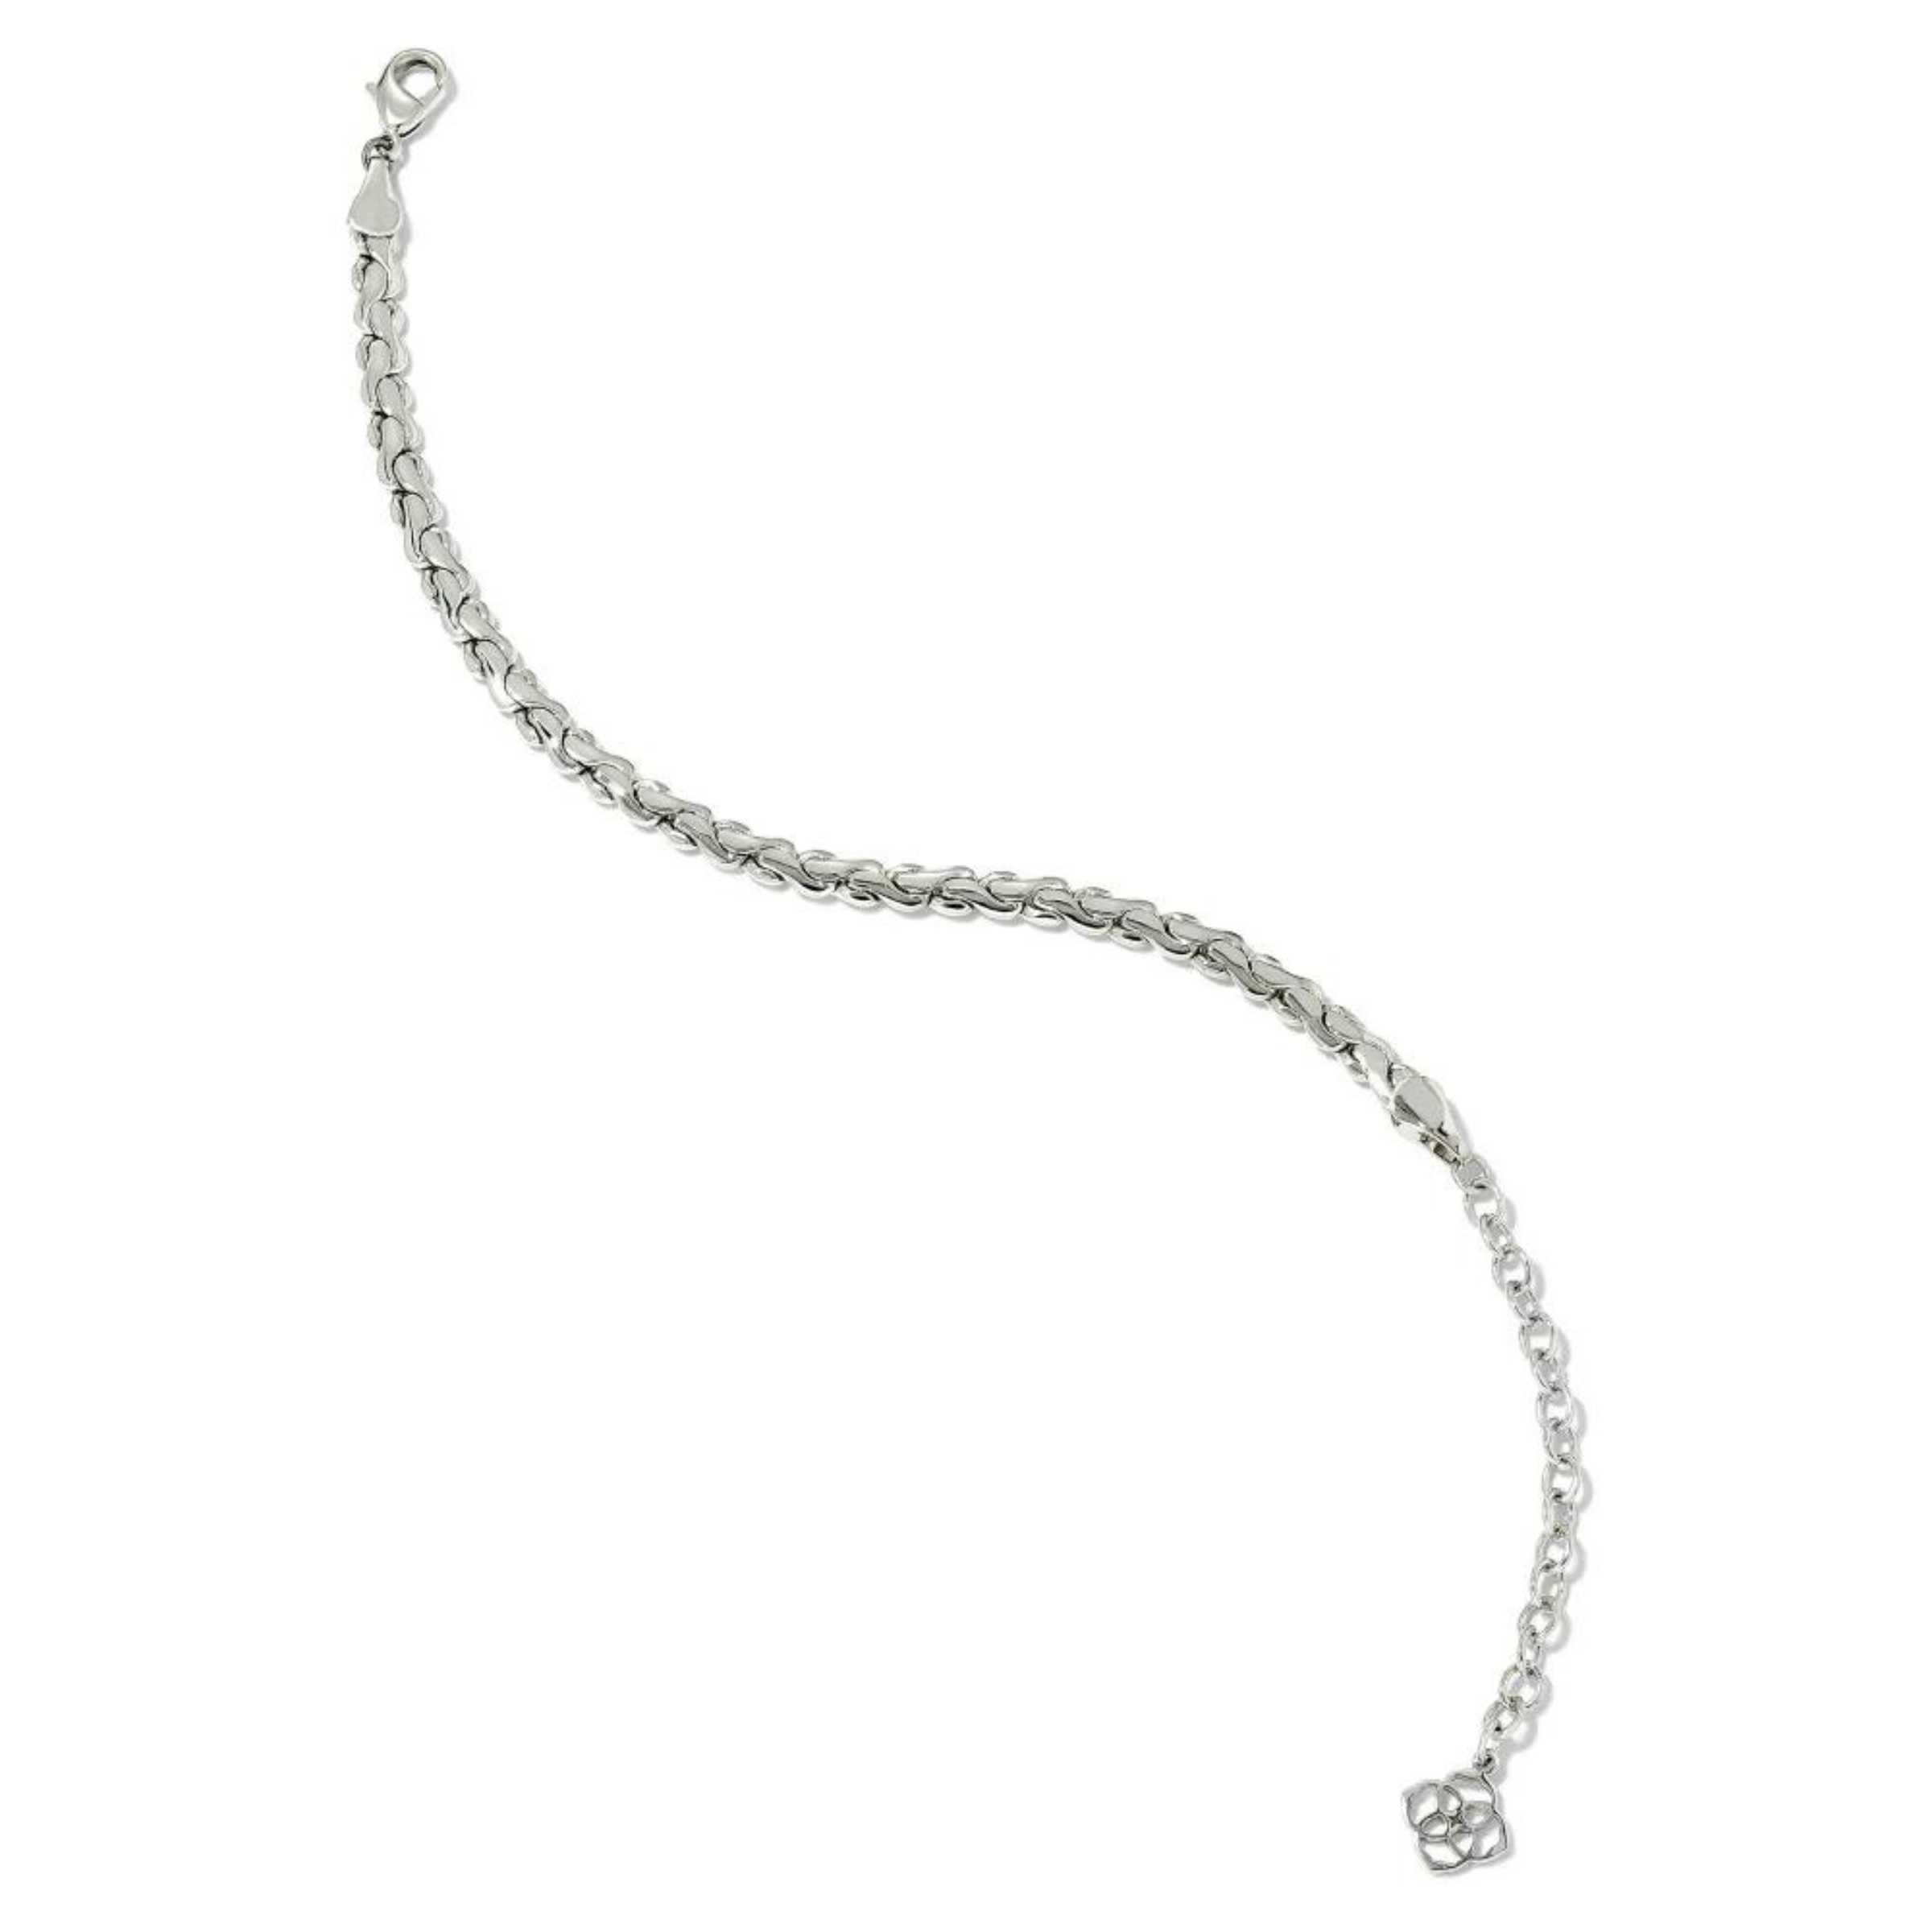 Kendra Scott | Brielle Chain Bracelet in Silver - Giddy Up Glamour Boutique